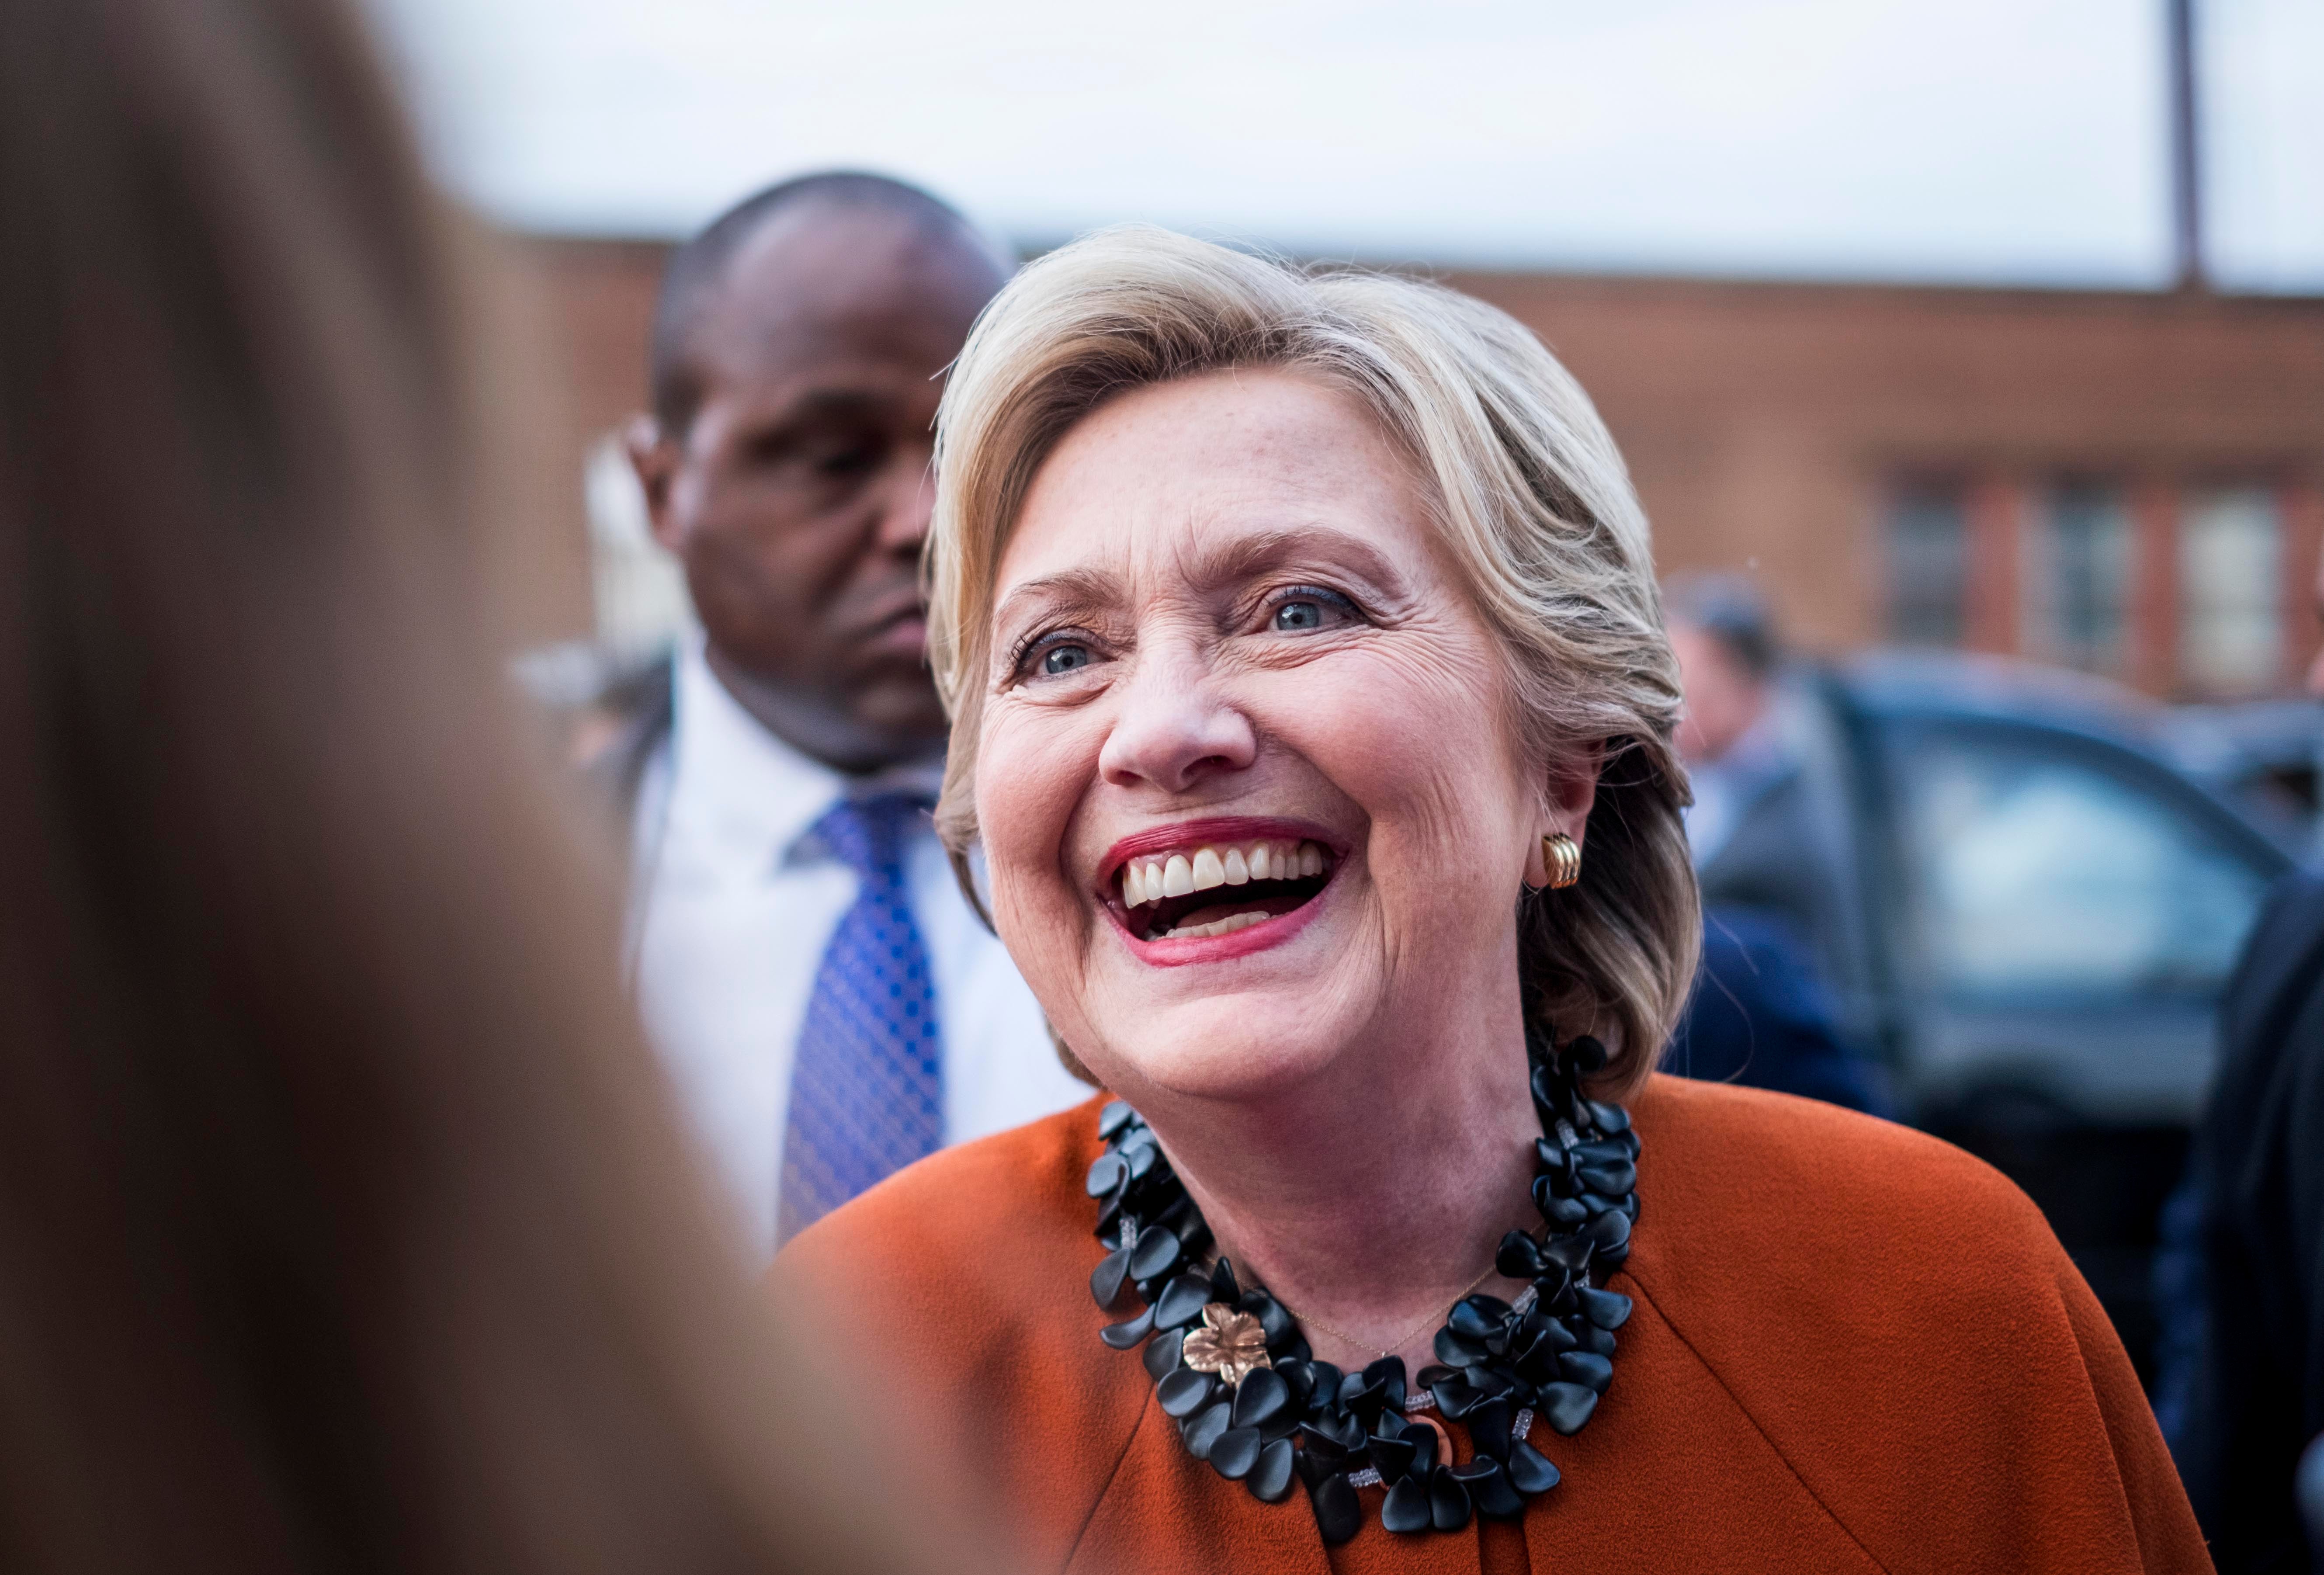 It’s Official: Hillary Clinton Received More Votes Than Any Losing Candidate In U.S. History